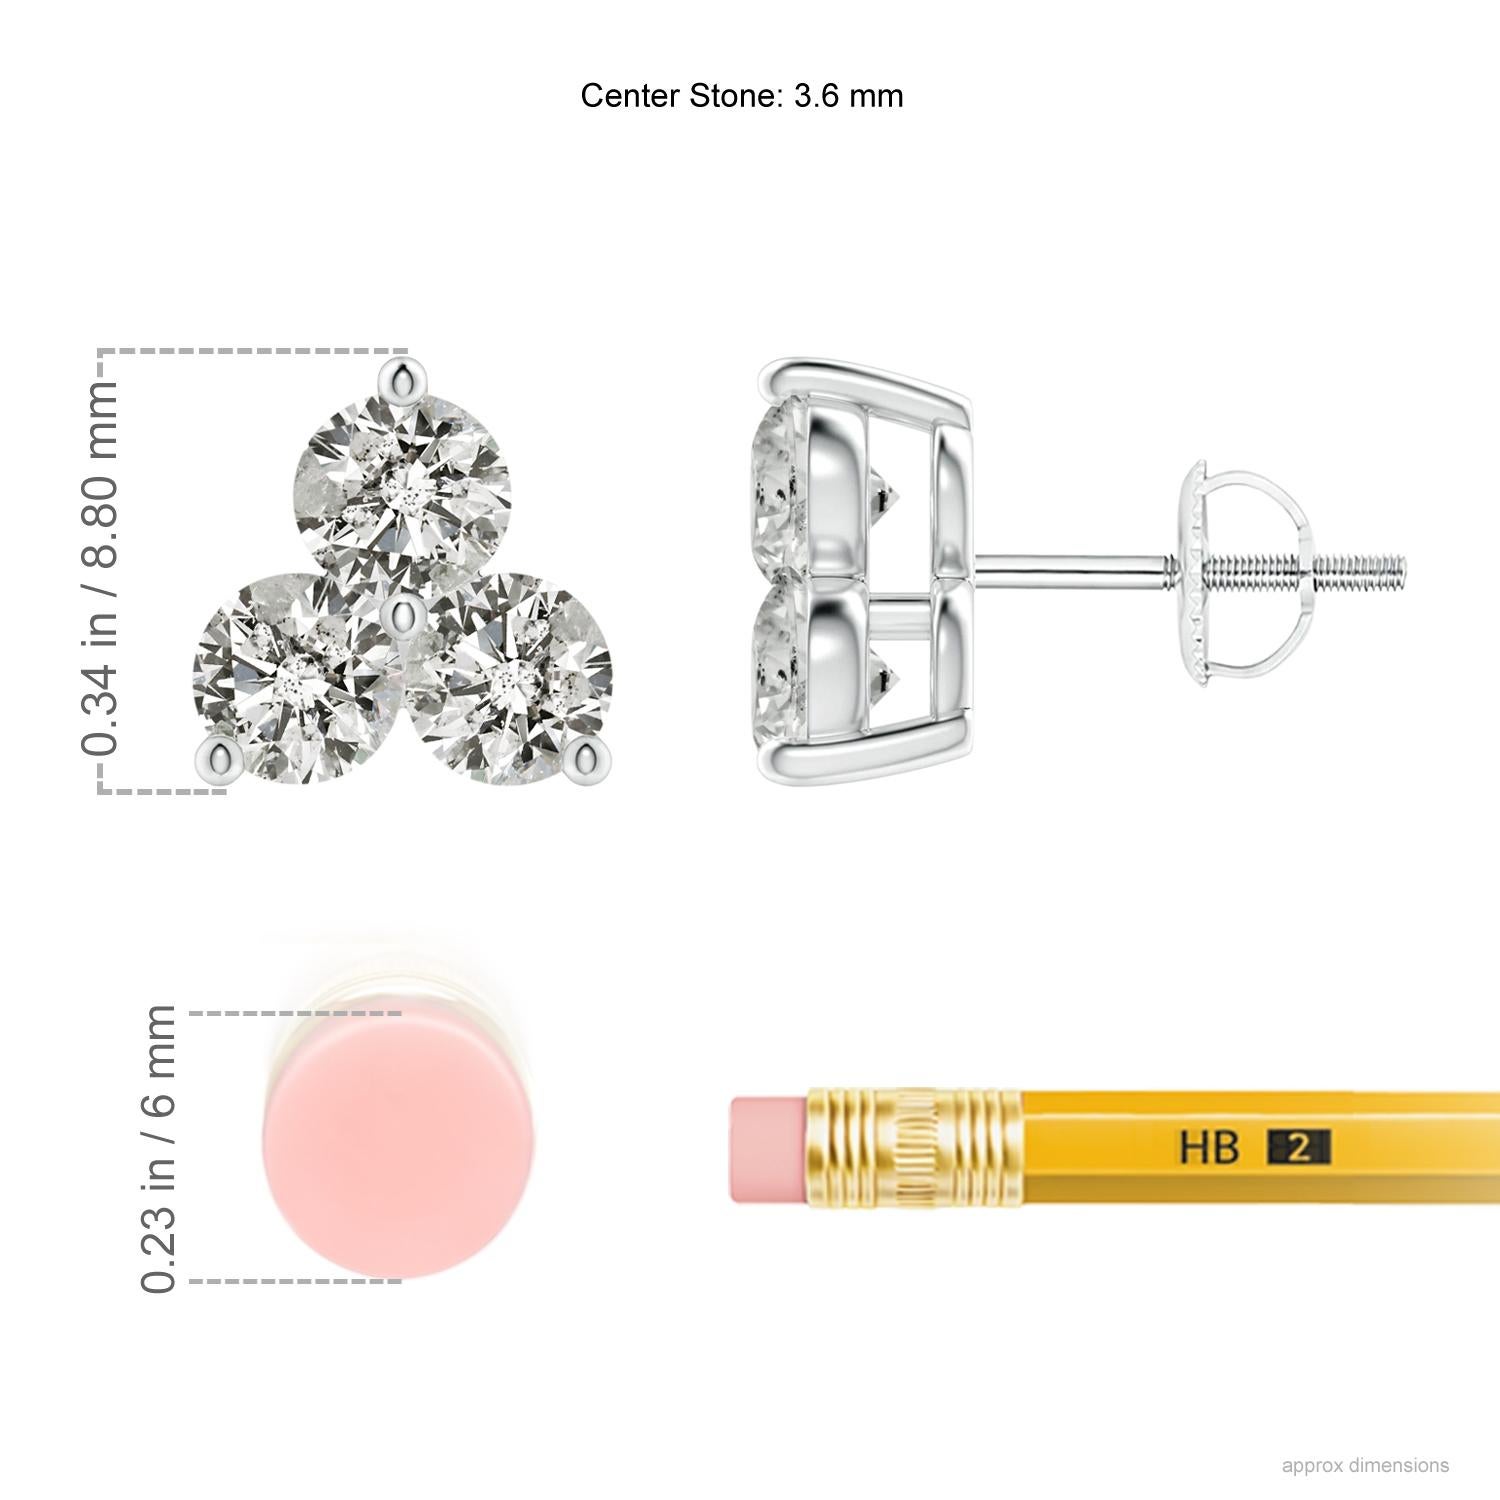 Trios of sparkling round diamonds are held in a shared prong setting to look like fascinating clusters on these stud earrings. Their glimmering white allure will enchant you and accentuate your look in a beautiful way. Crafted in Platinum, these